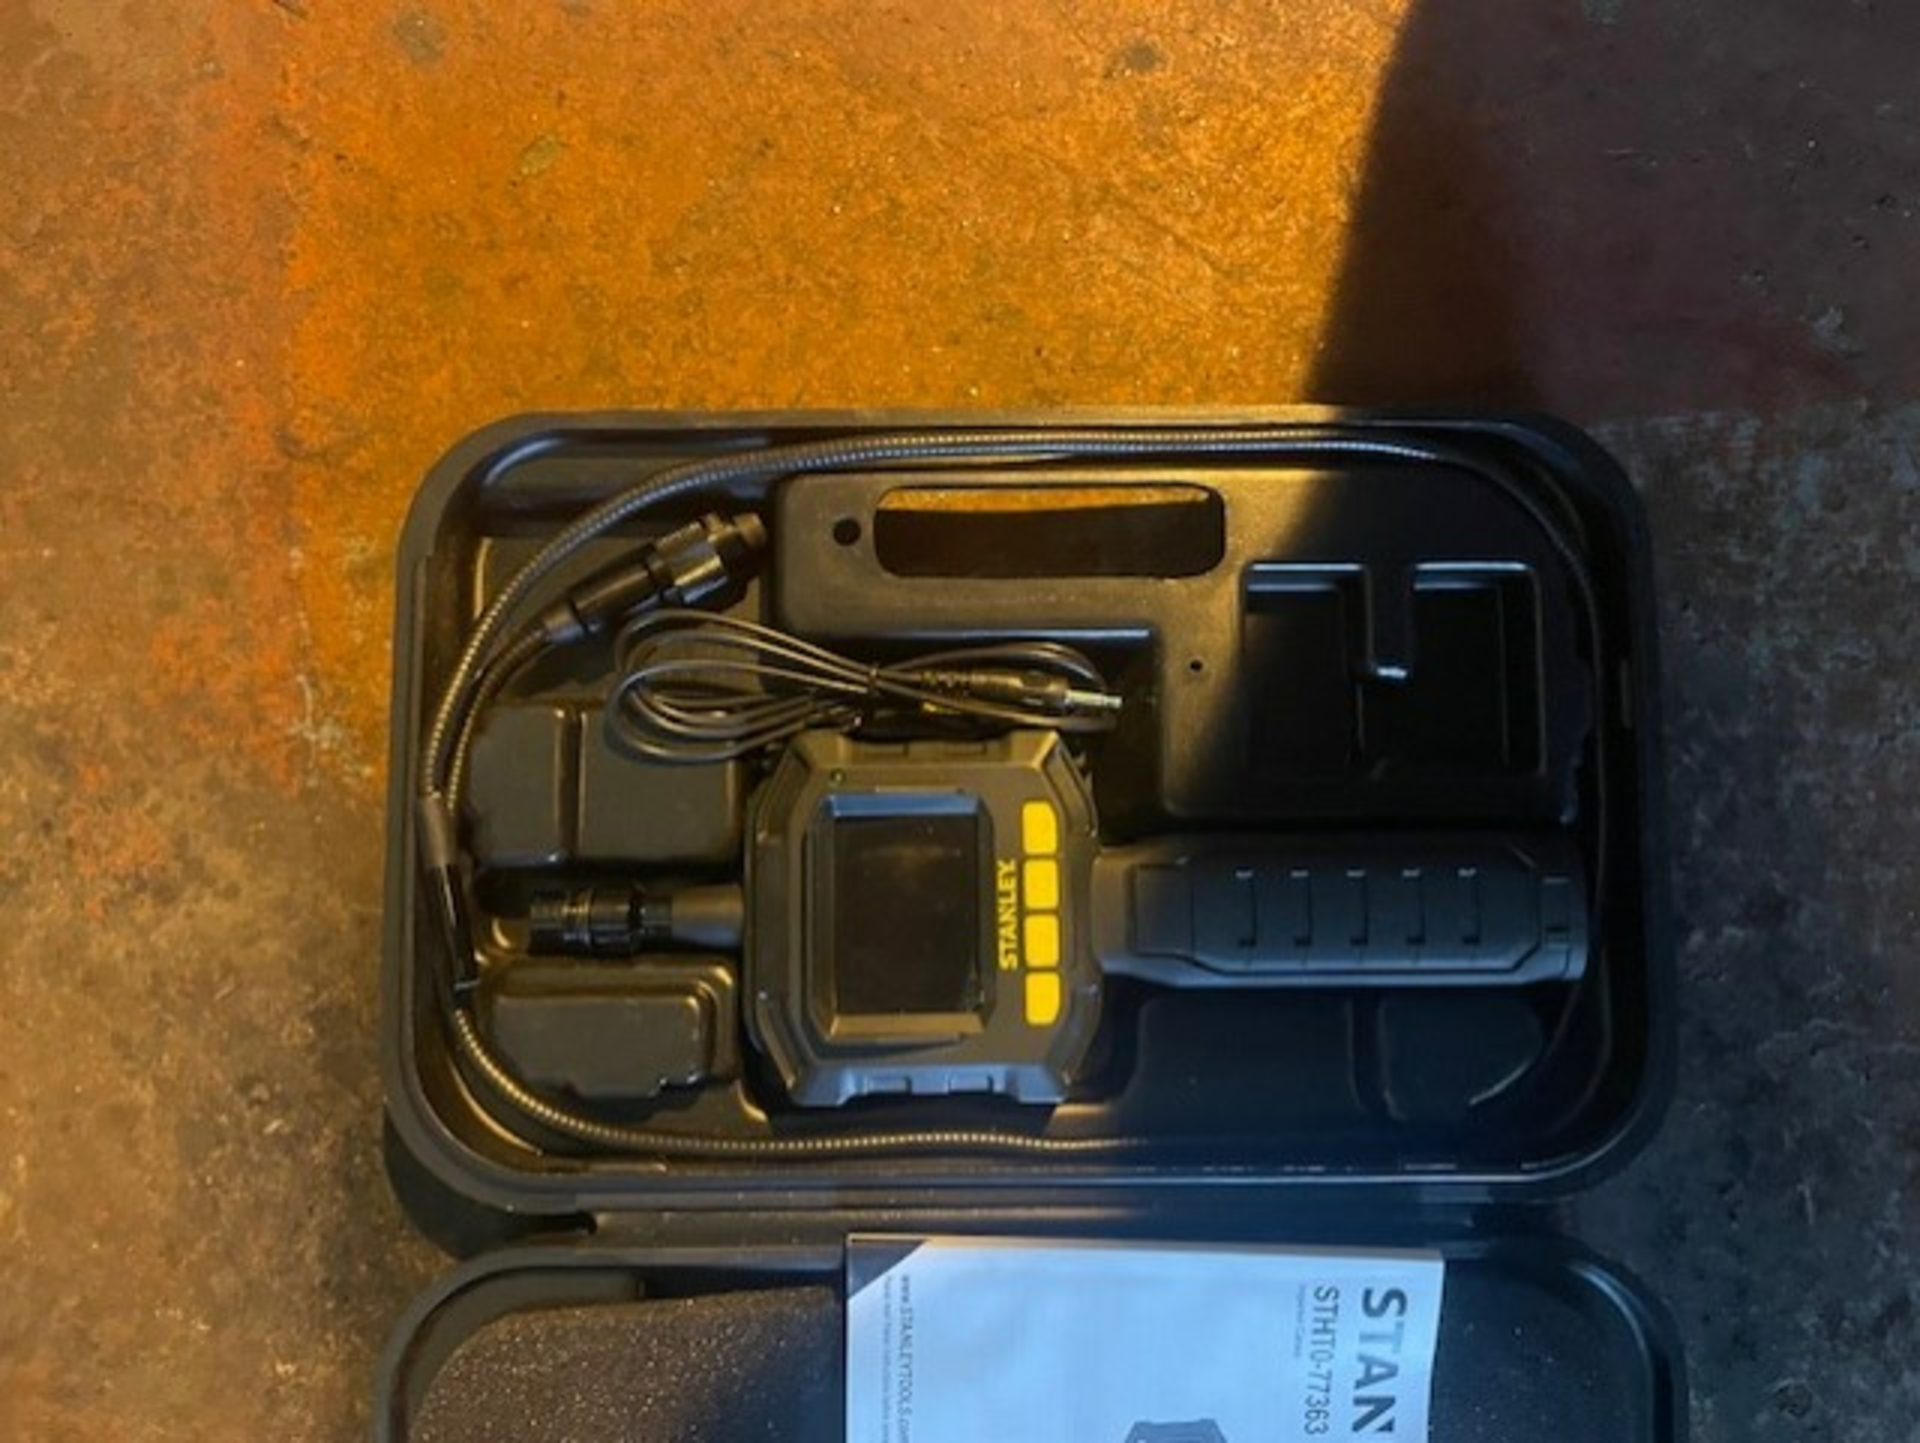 Inspection camera like brand new inside box very clean - Image 2 of 4